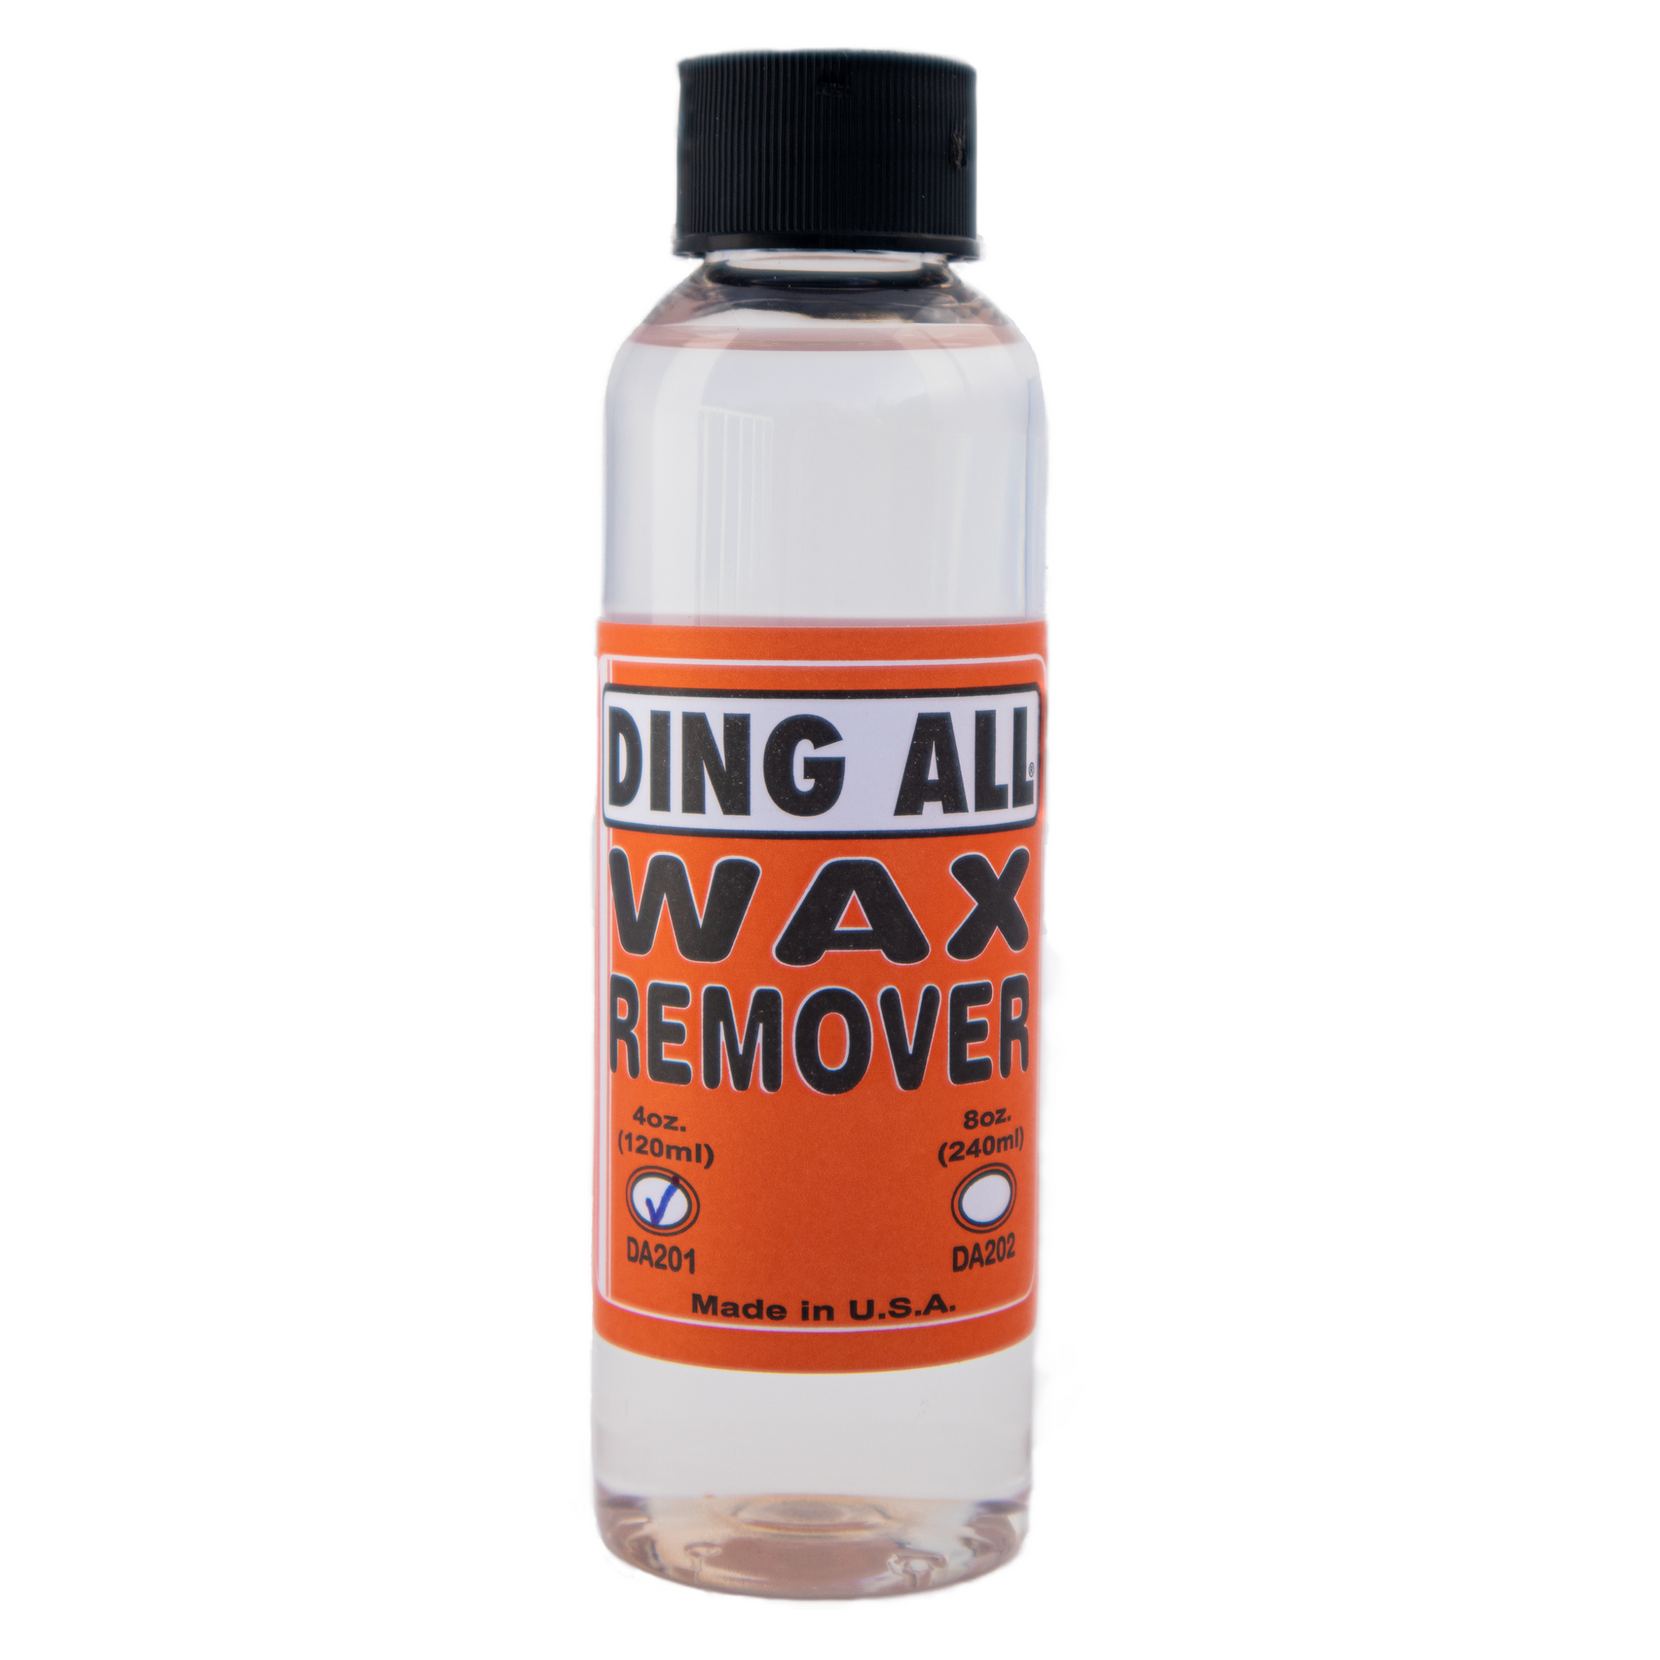 Ding All Wax Remover (Choose Size)